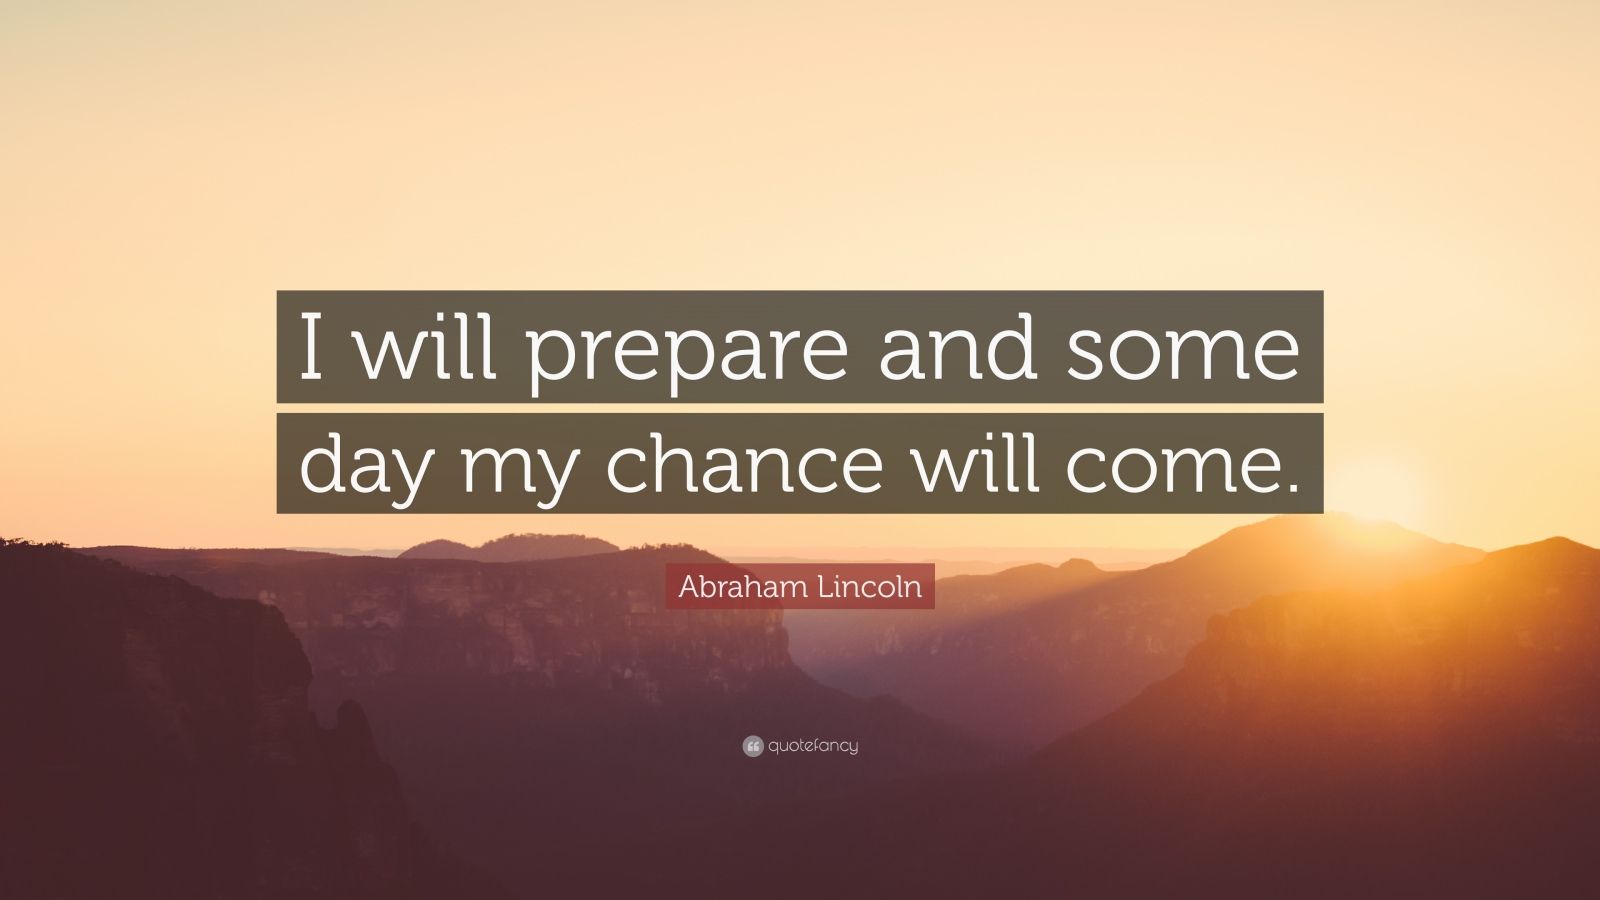 Abraham Lincoln Quote: “I will prepare and some day my chance will come.” (24 ...